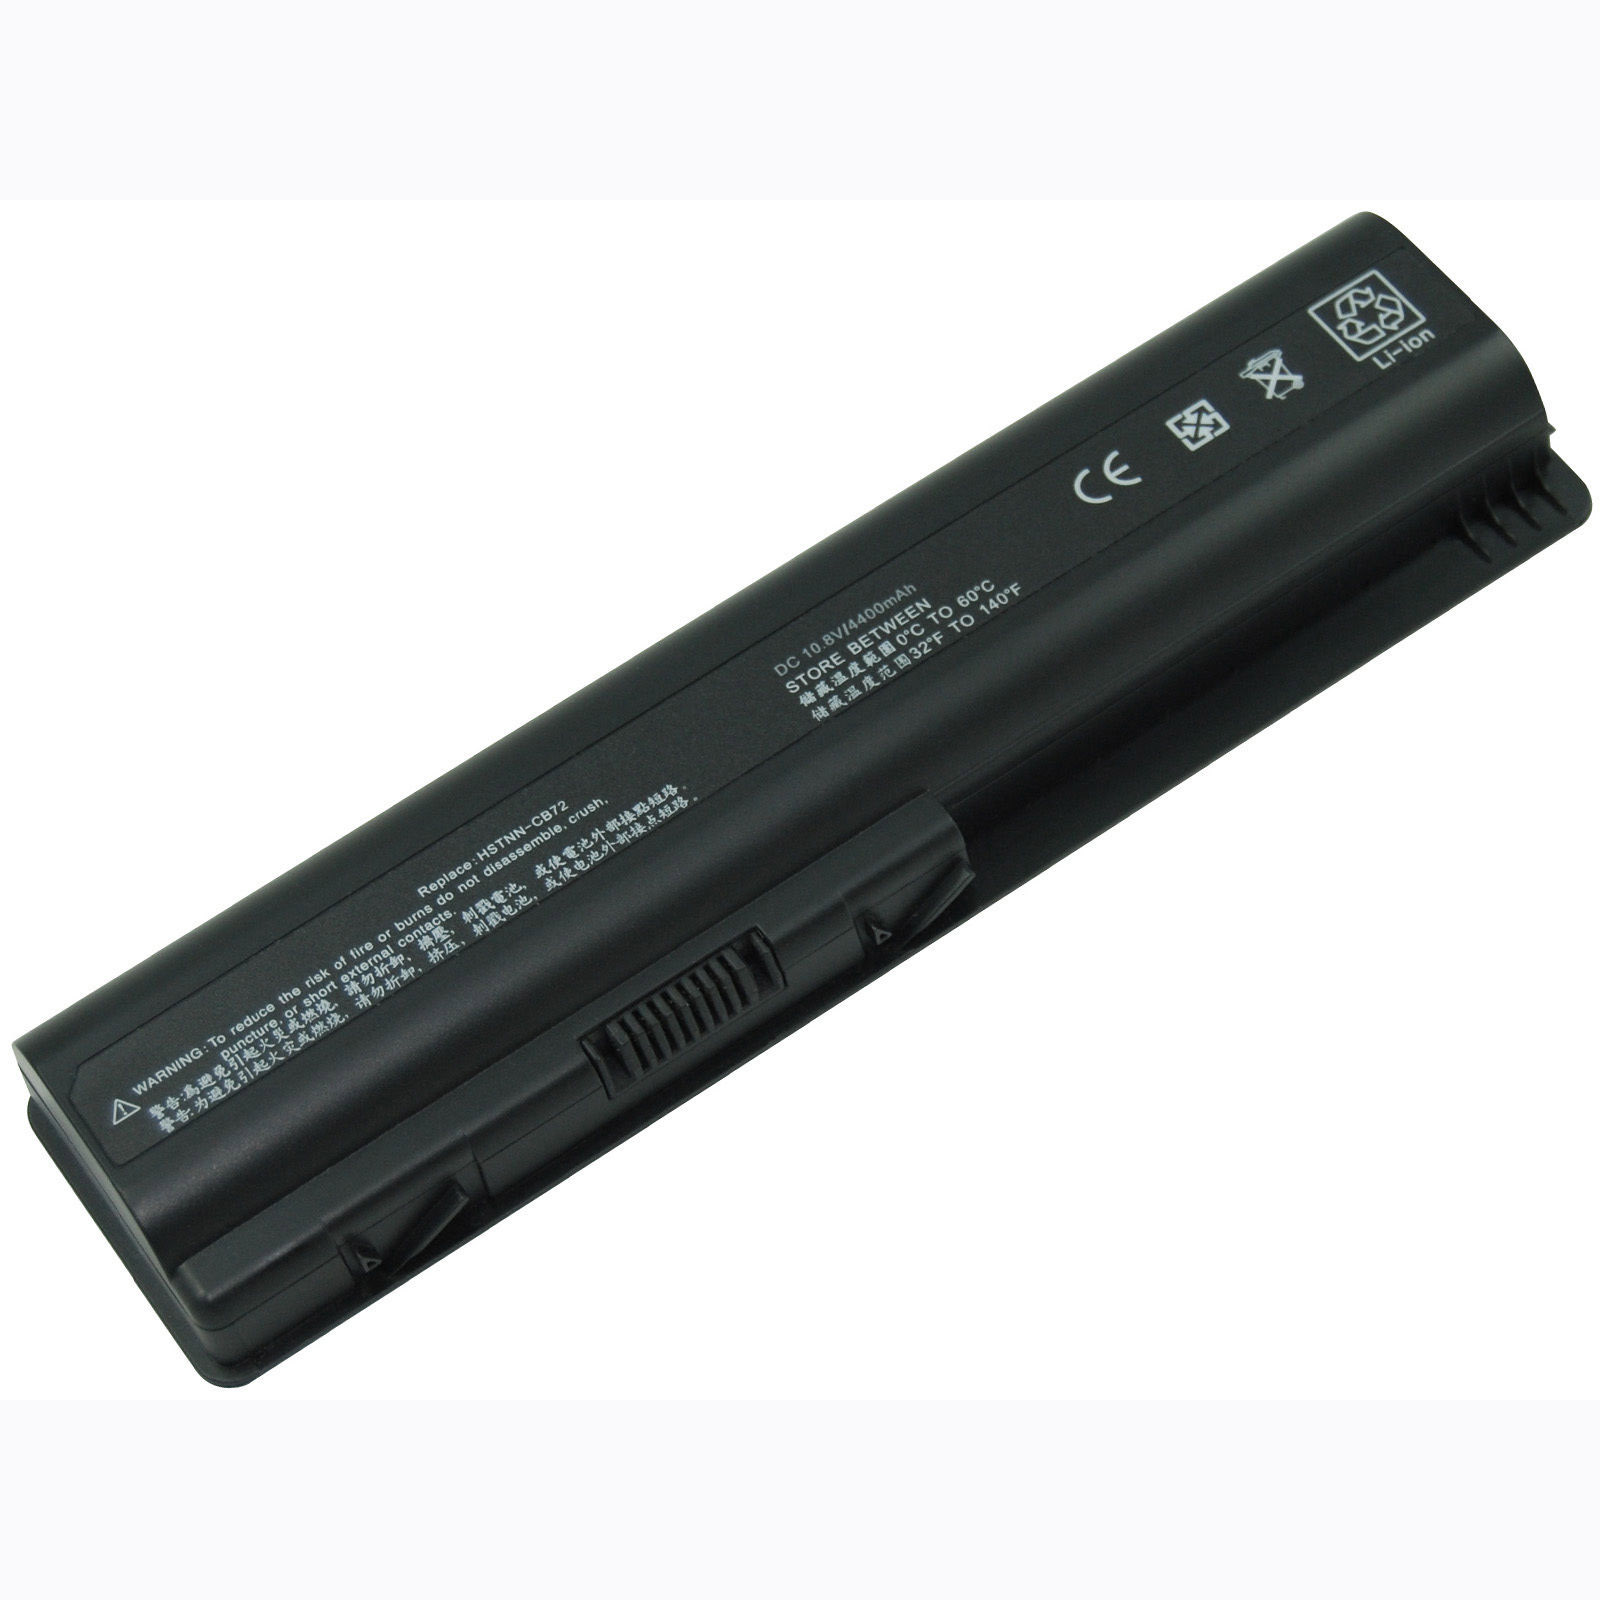 HP Compaq 511884-001 Battery Replacement